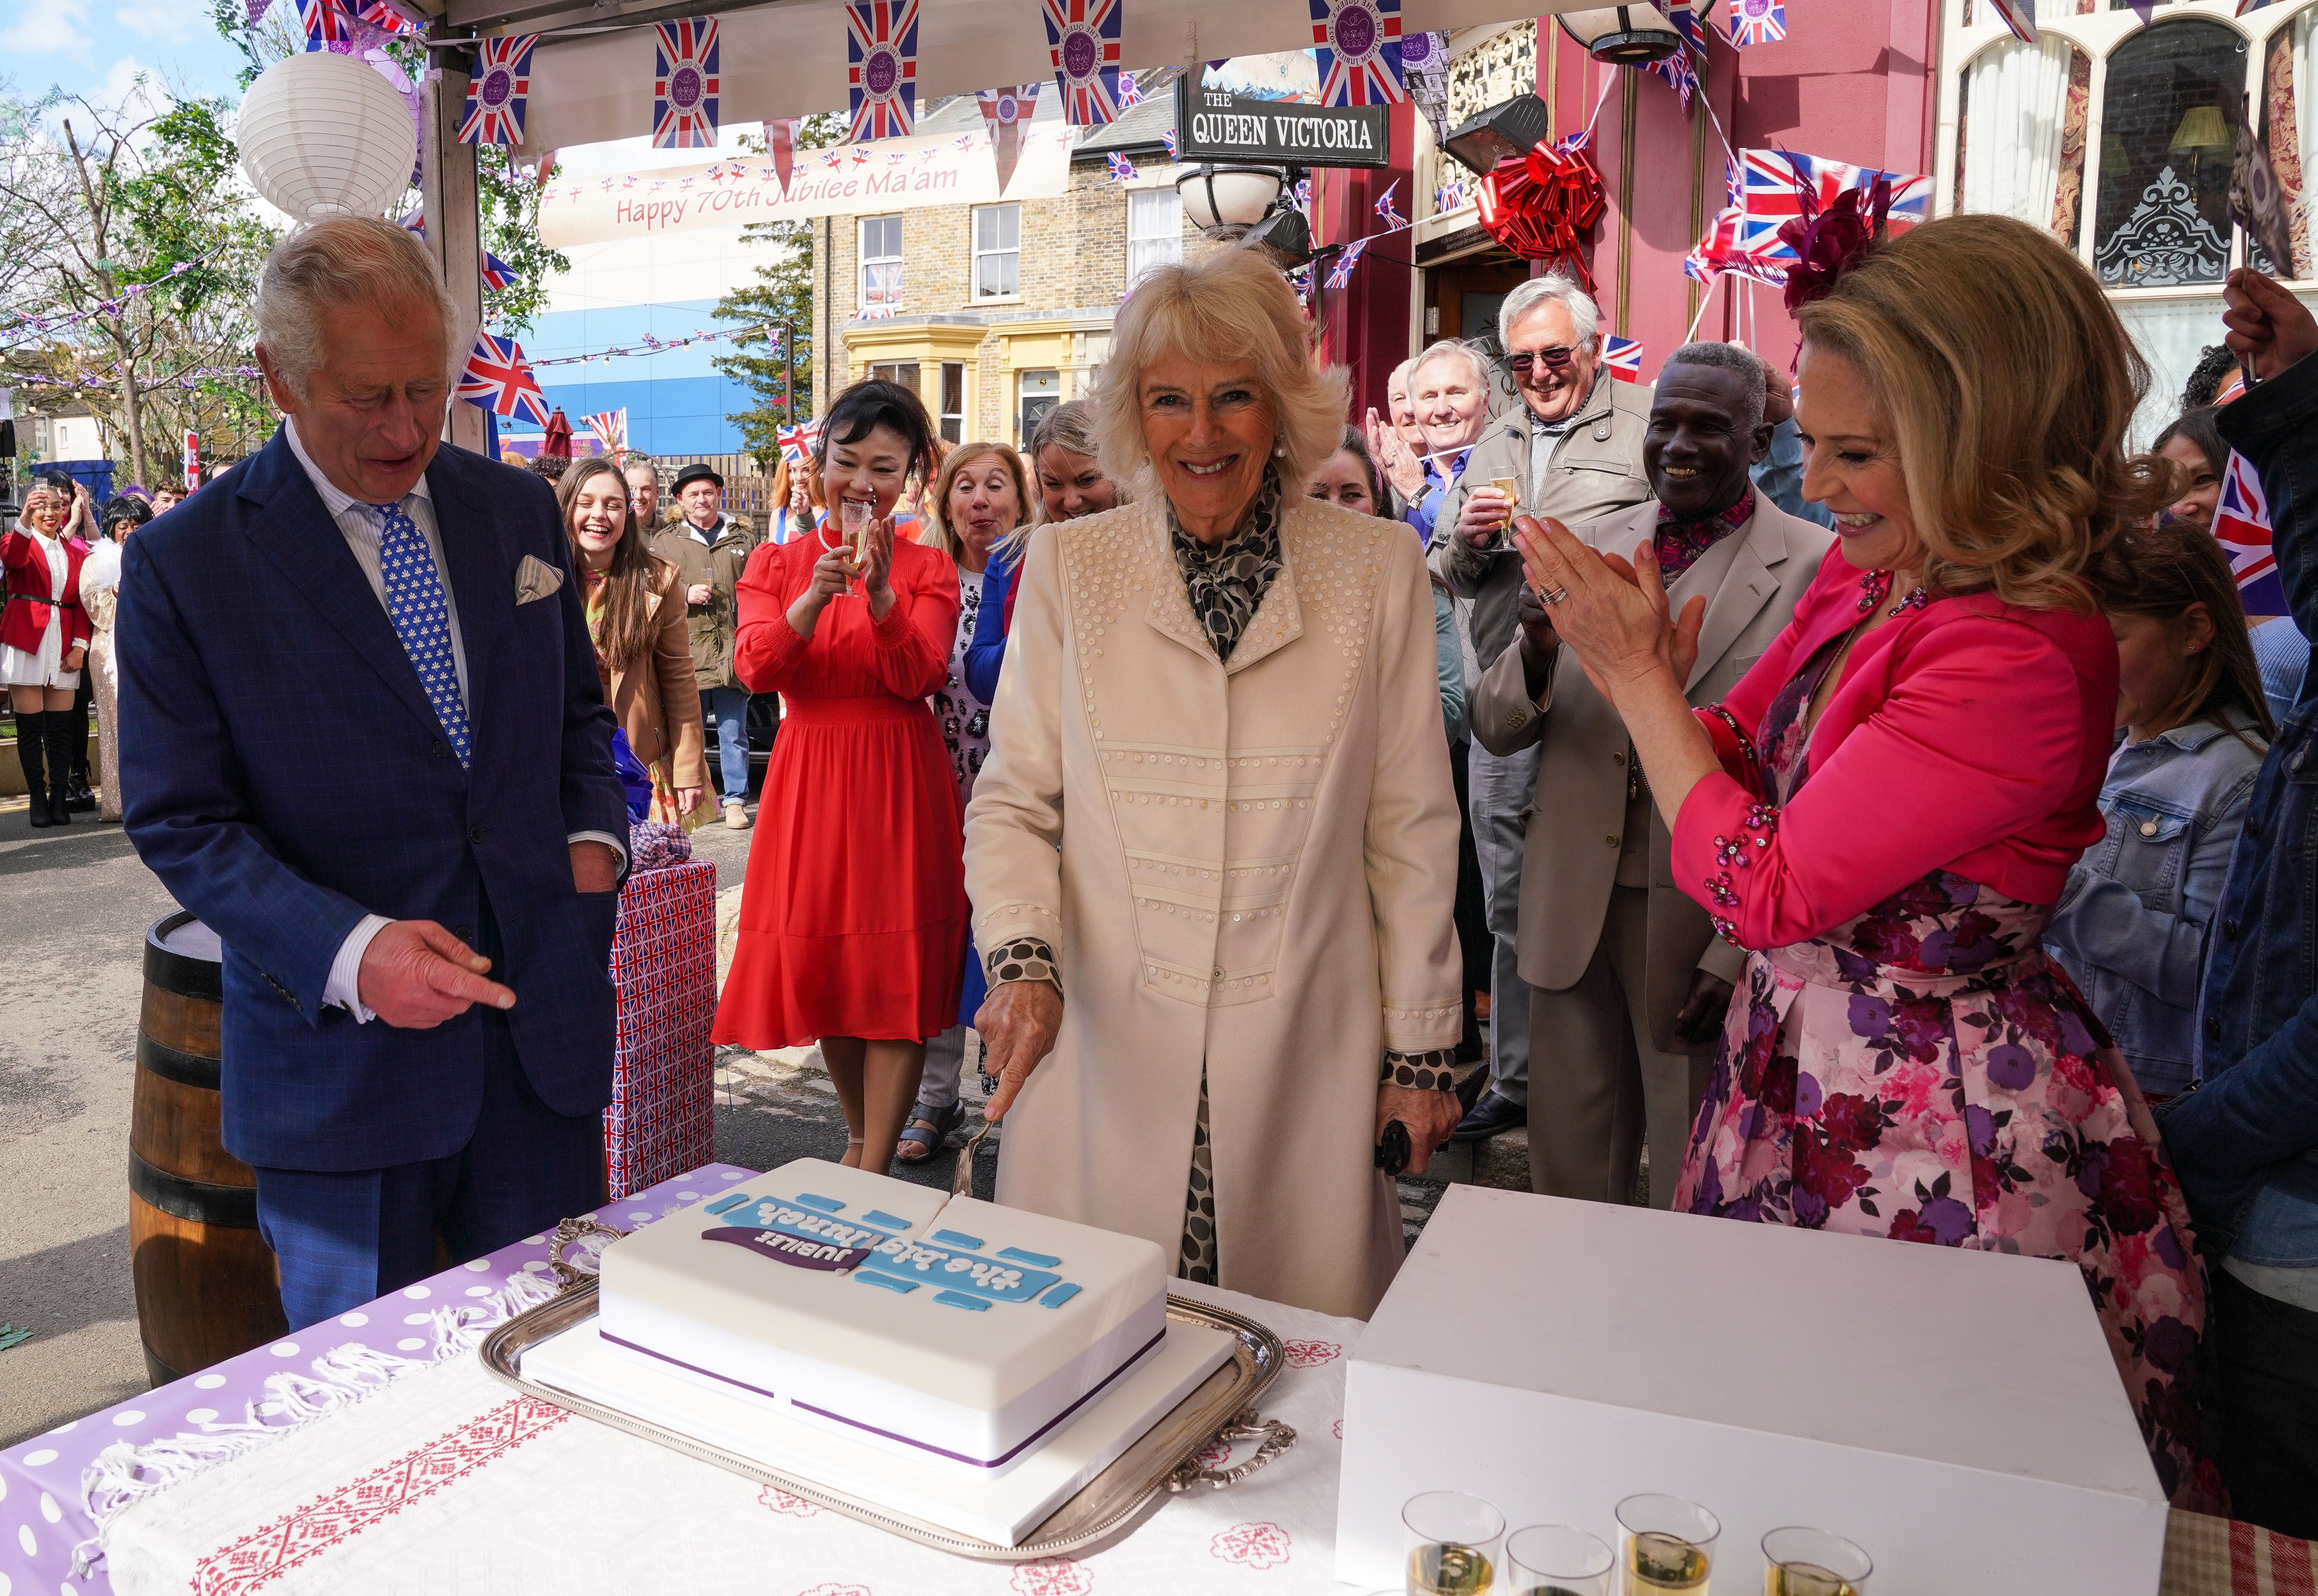 Jubilee episode of EastEnders featuring the Prince of Wales and the Duchess of Cornwall (BBC/PA)